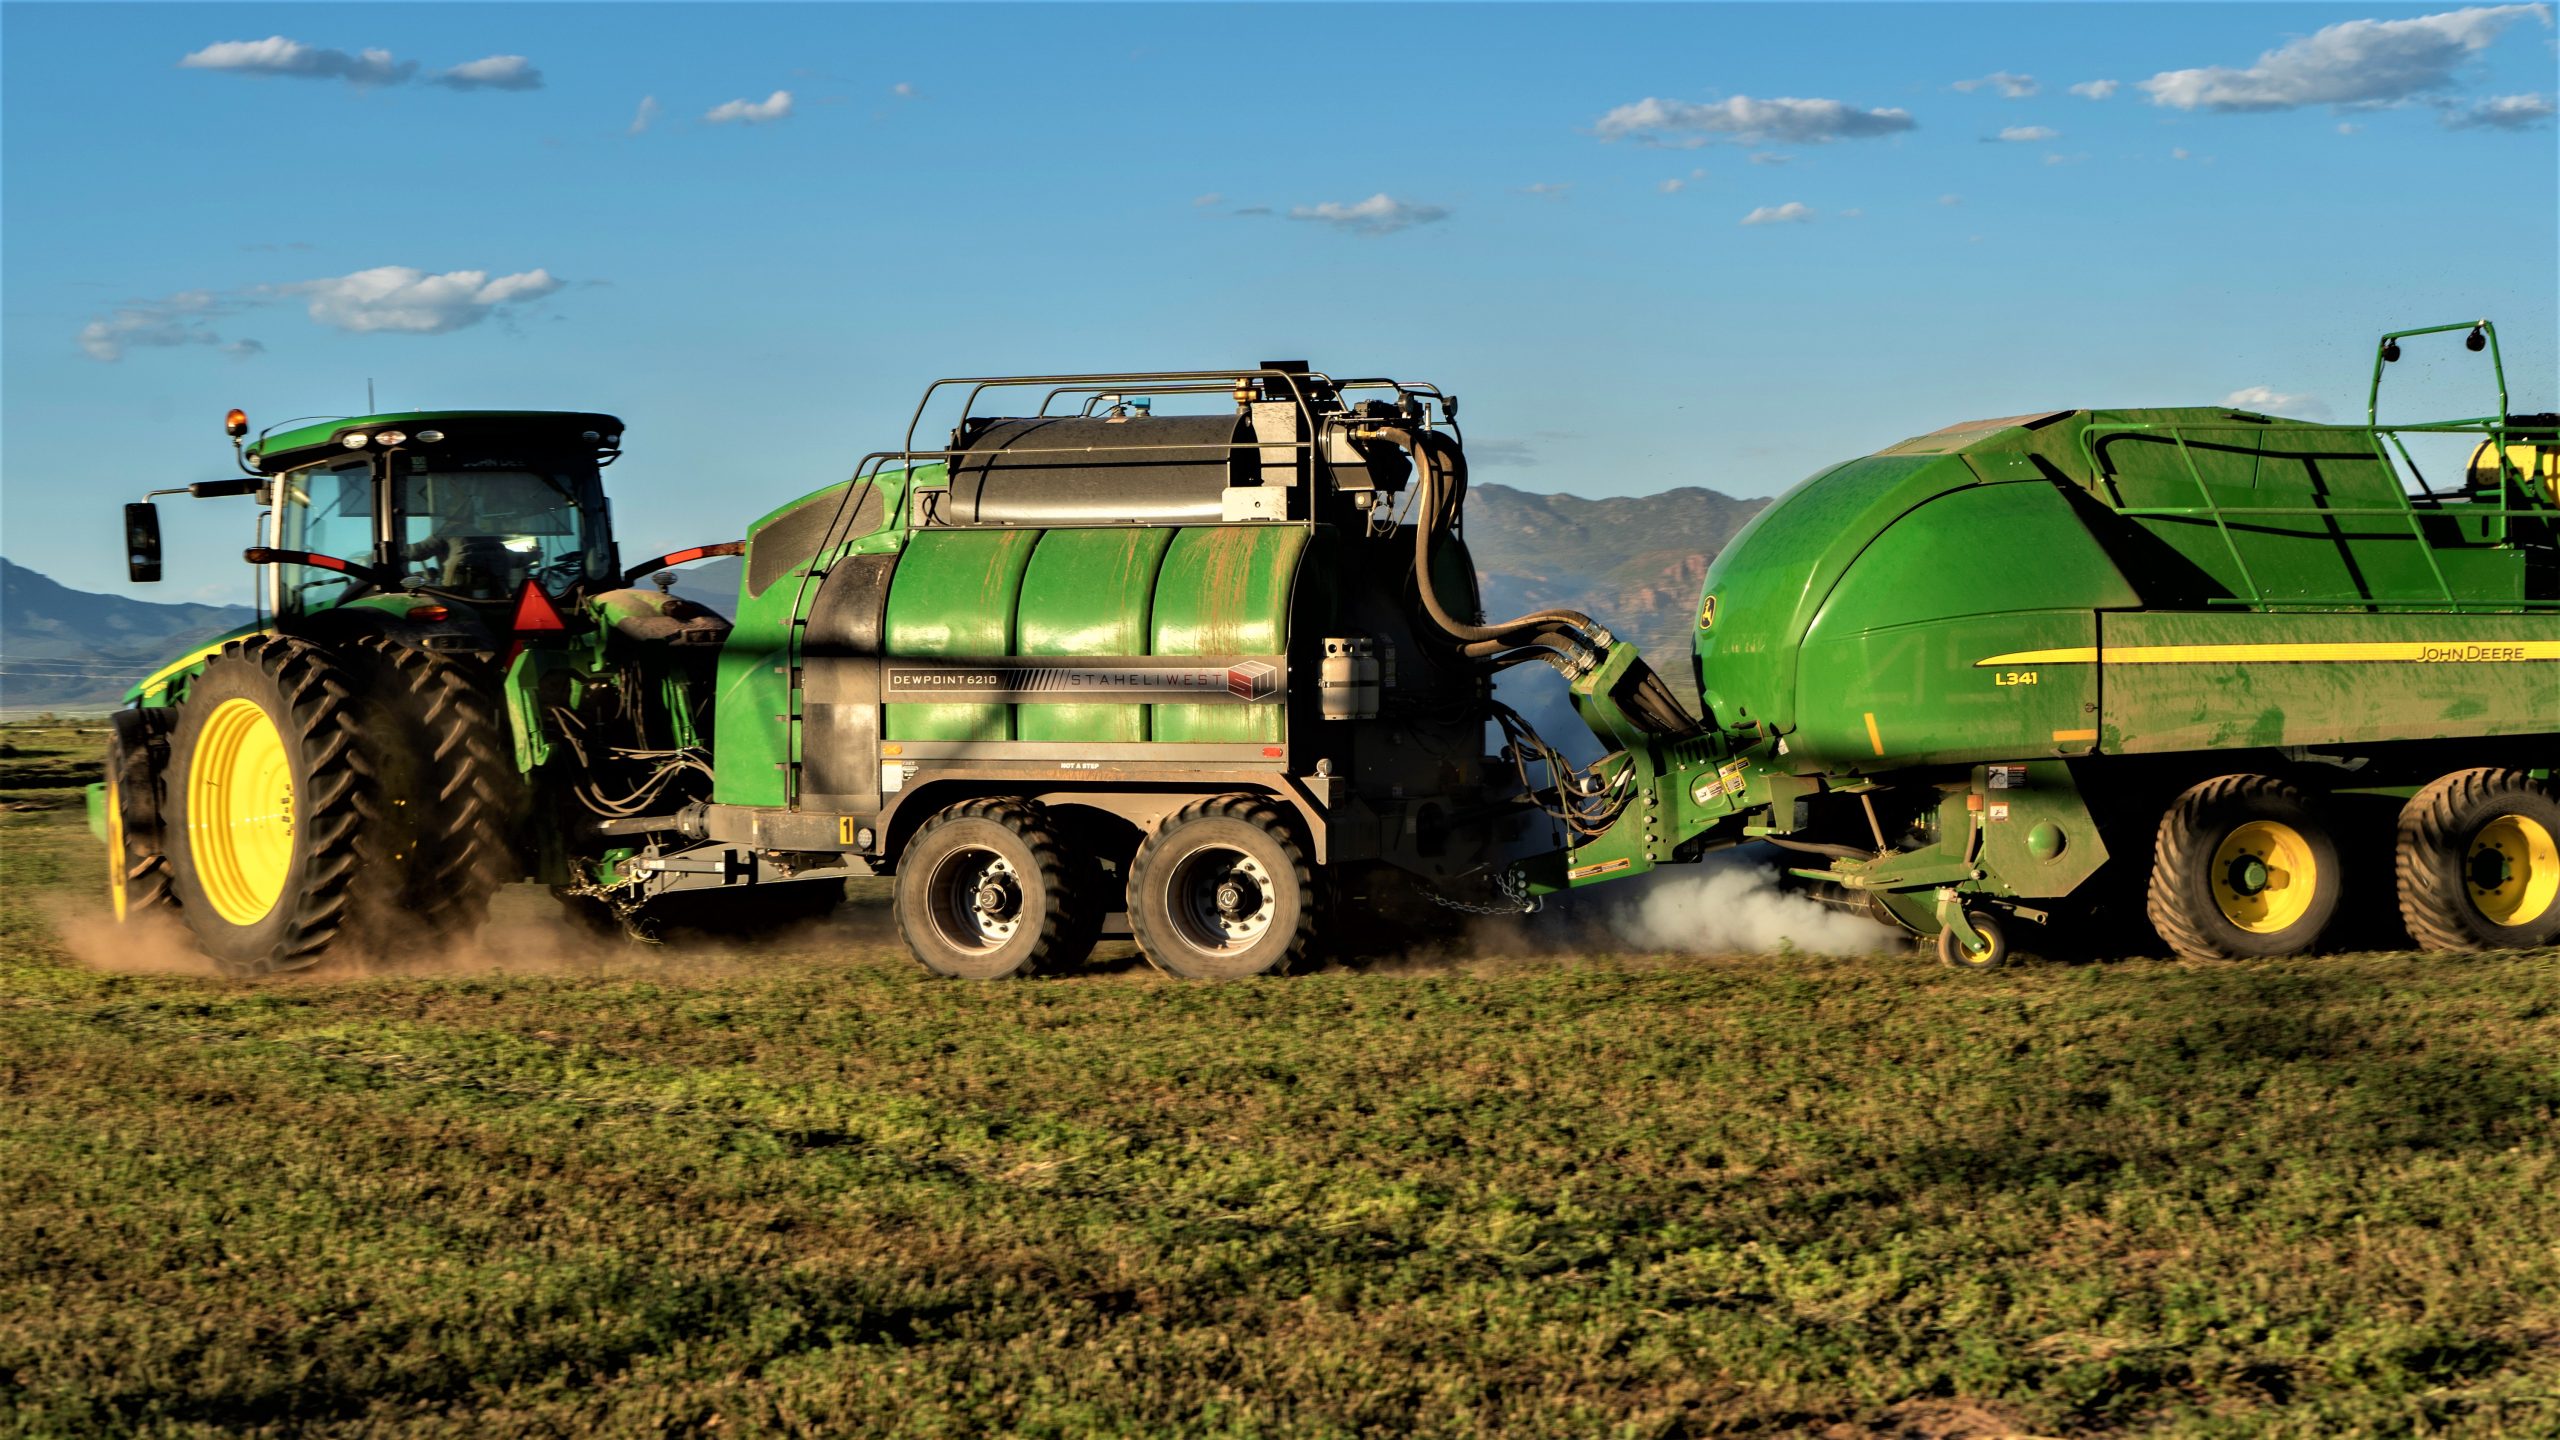 Featured image for “Science Tells us why Steam is so Effective When Baling Hay”